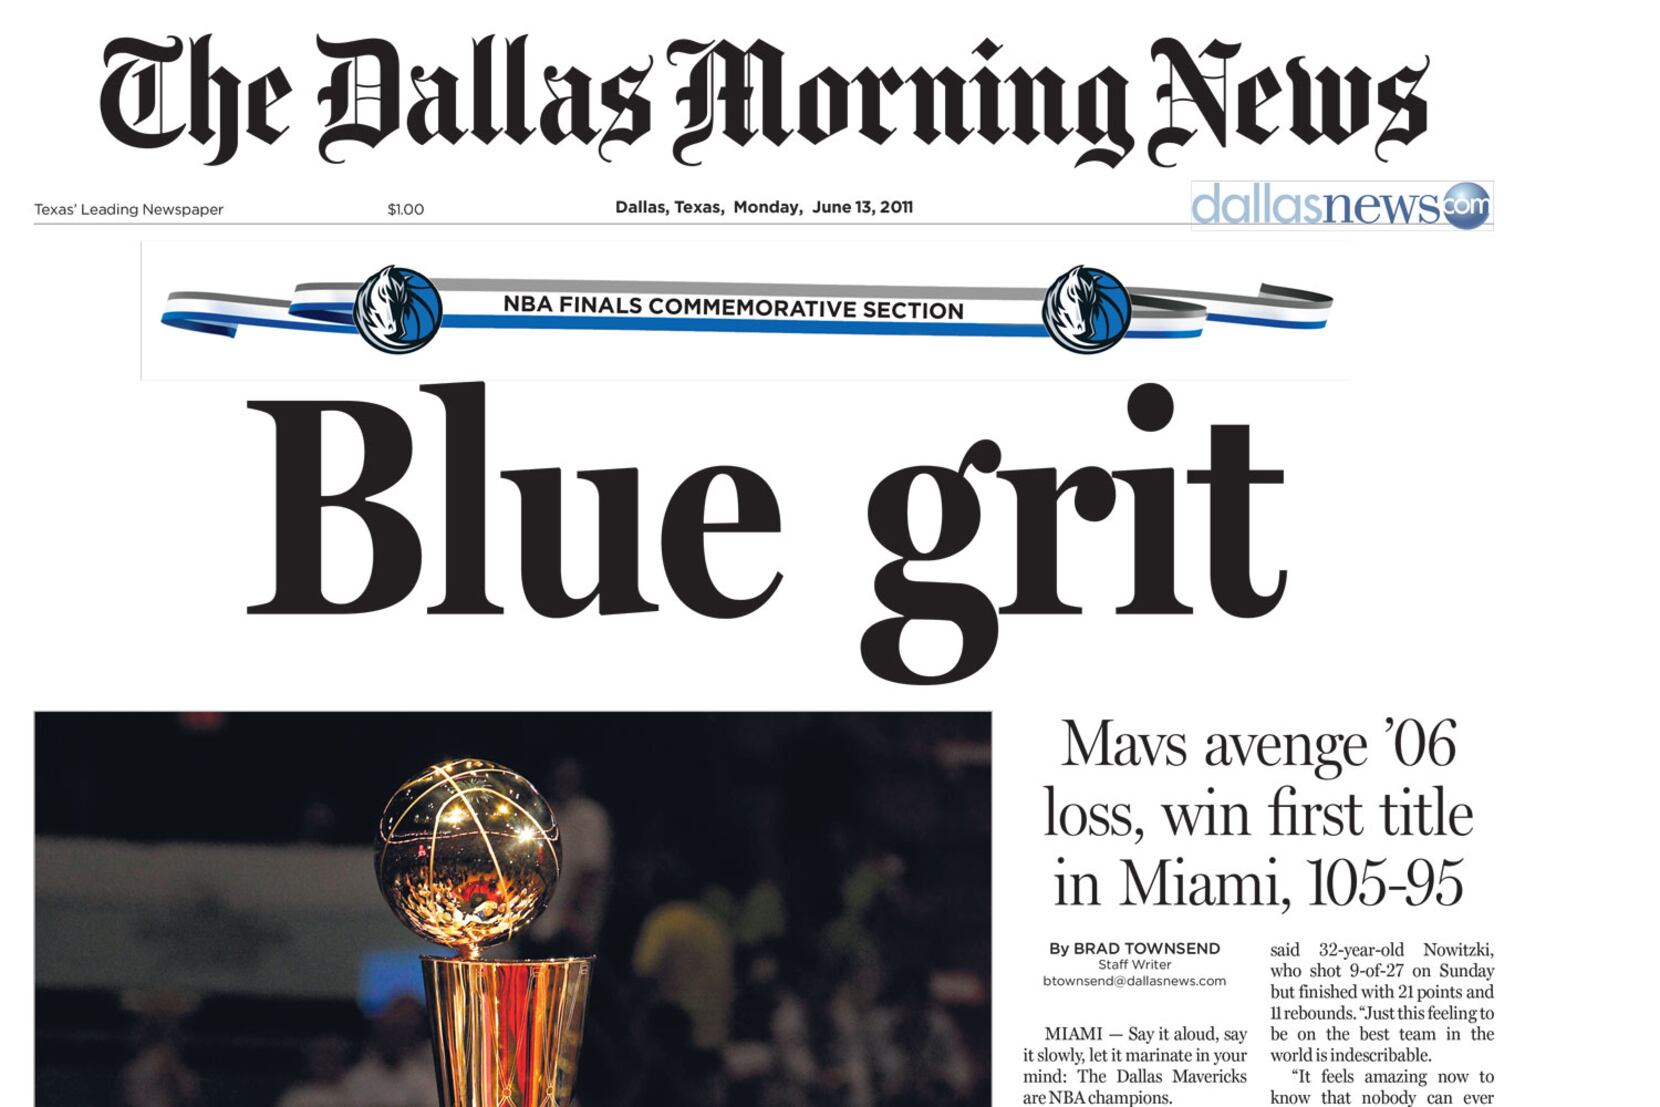 Dallas Mavericks take their talents to South Beach, leave with NBA  championship, 105-95, over Miami 